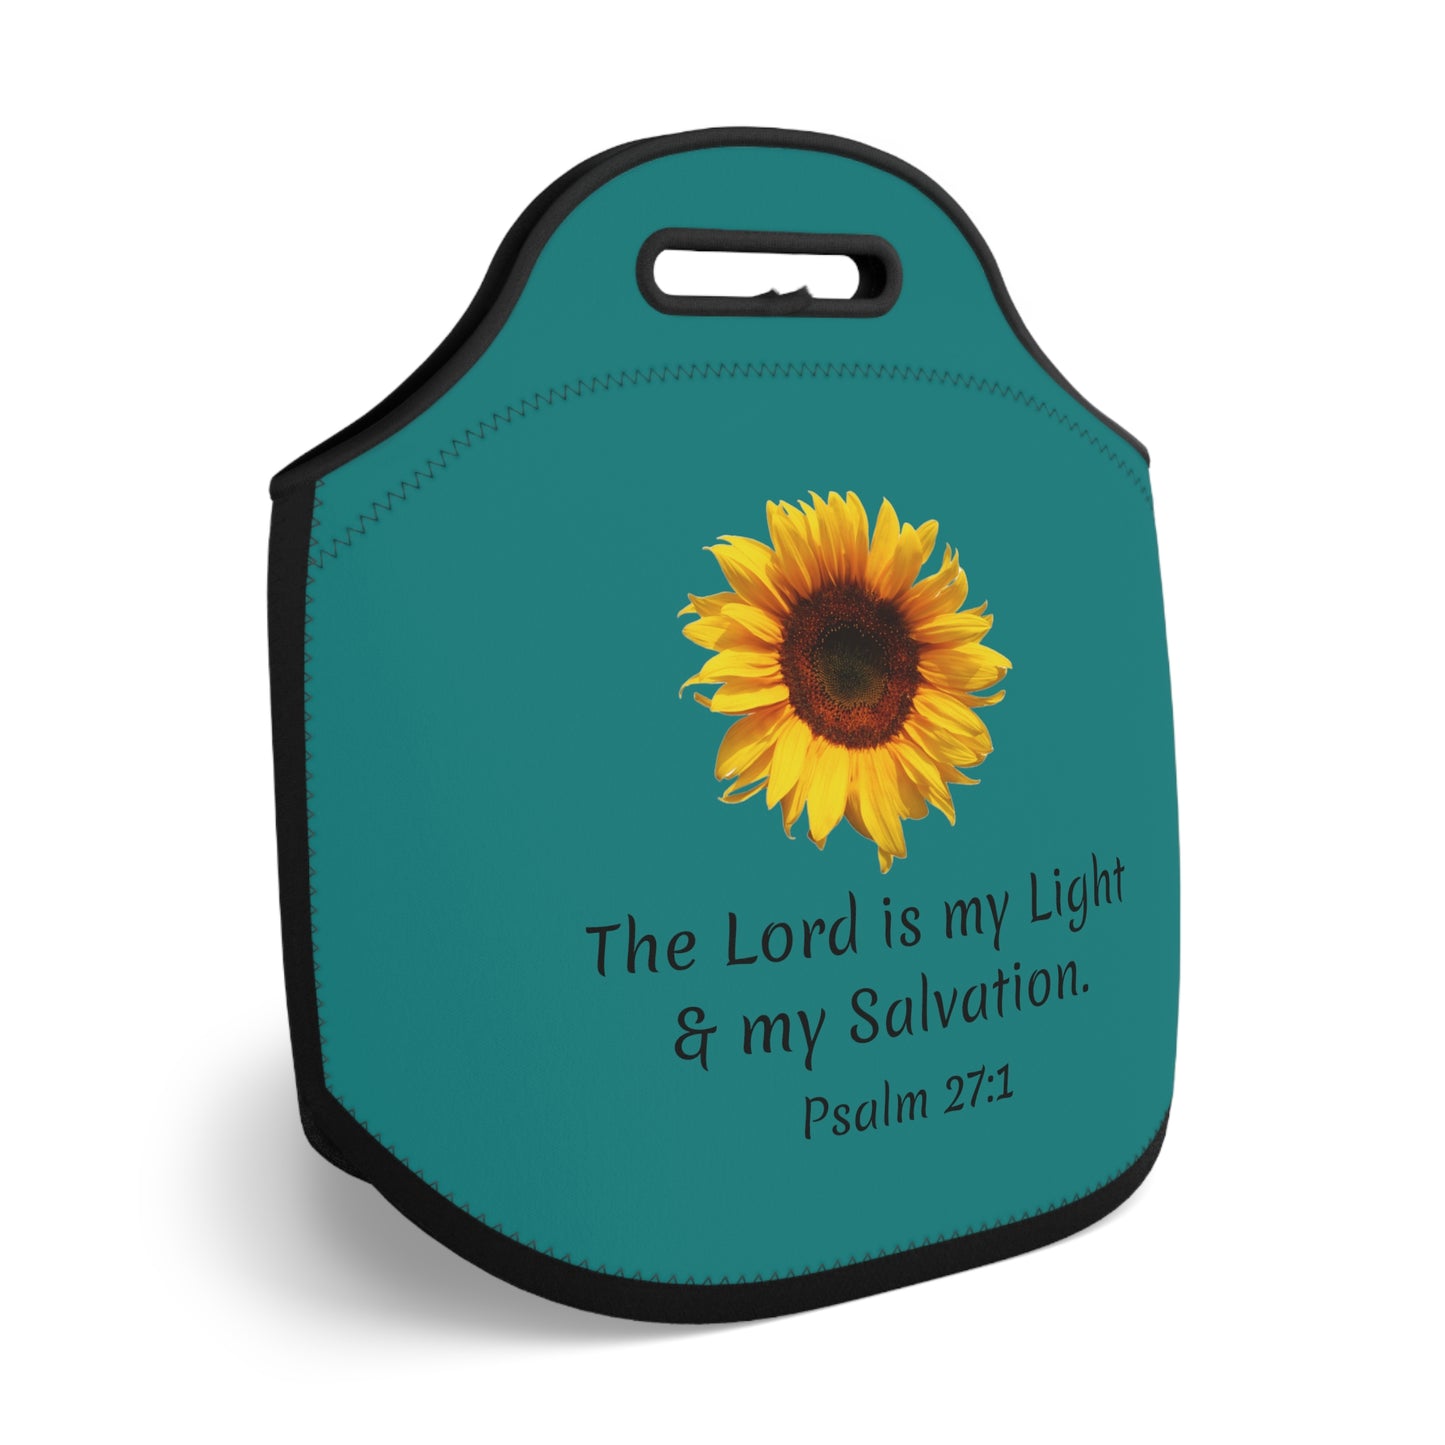 Neoprene Lunch Bag - The Lord Is My Light & My Salvation